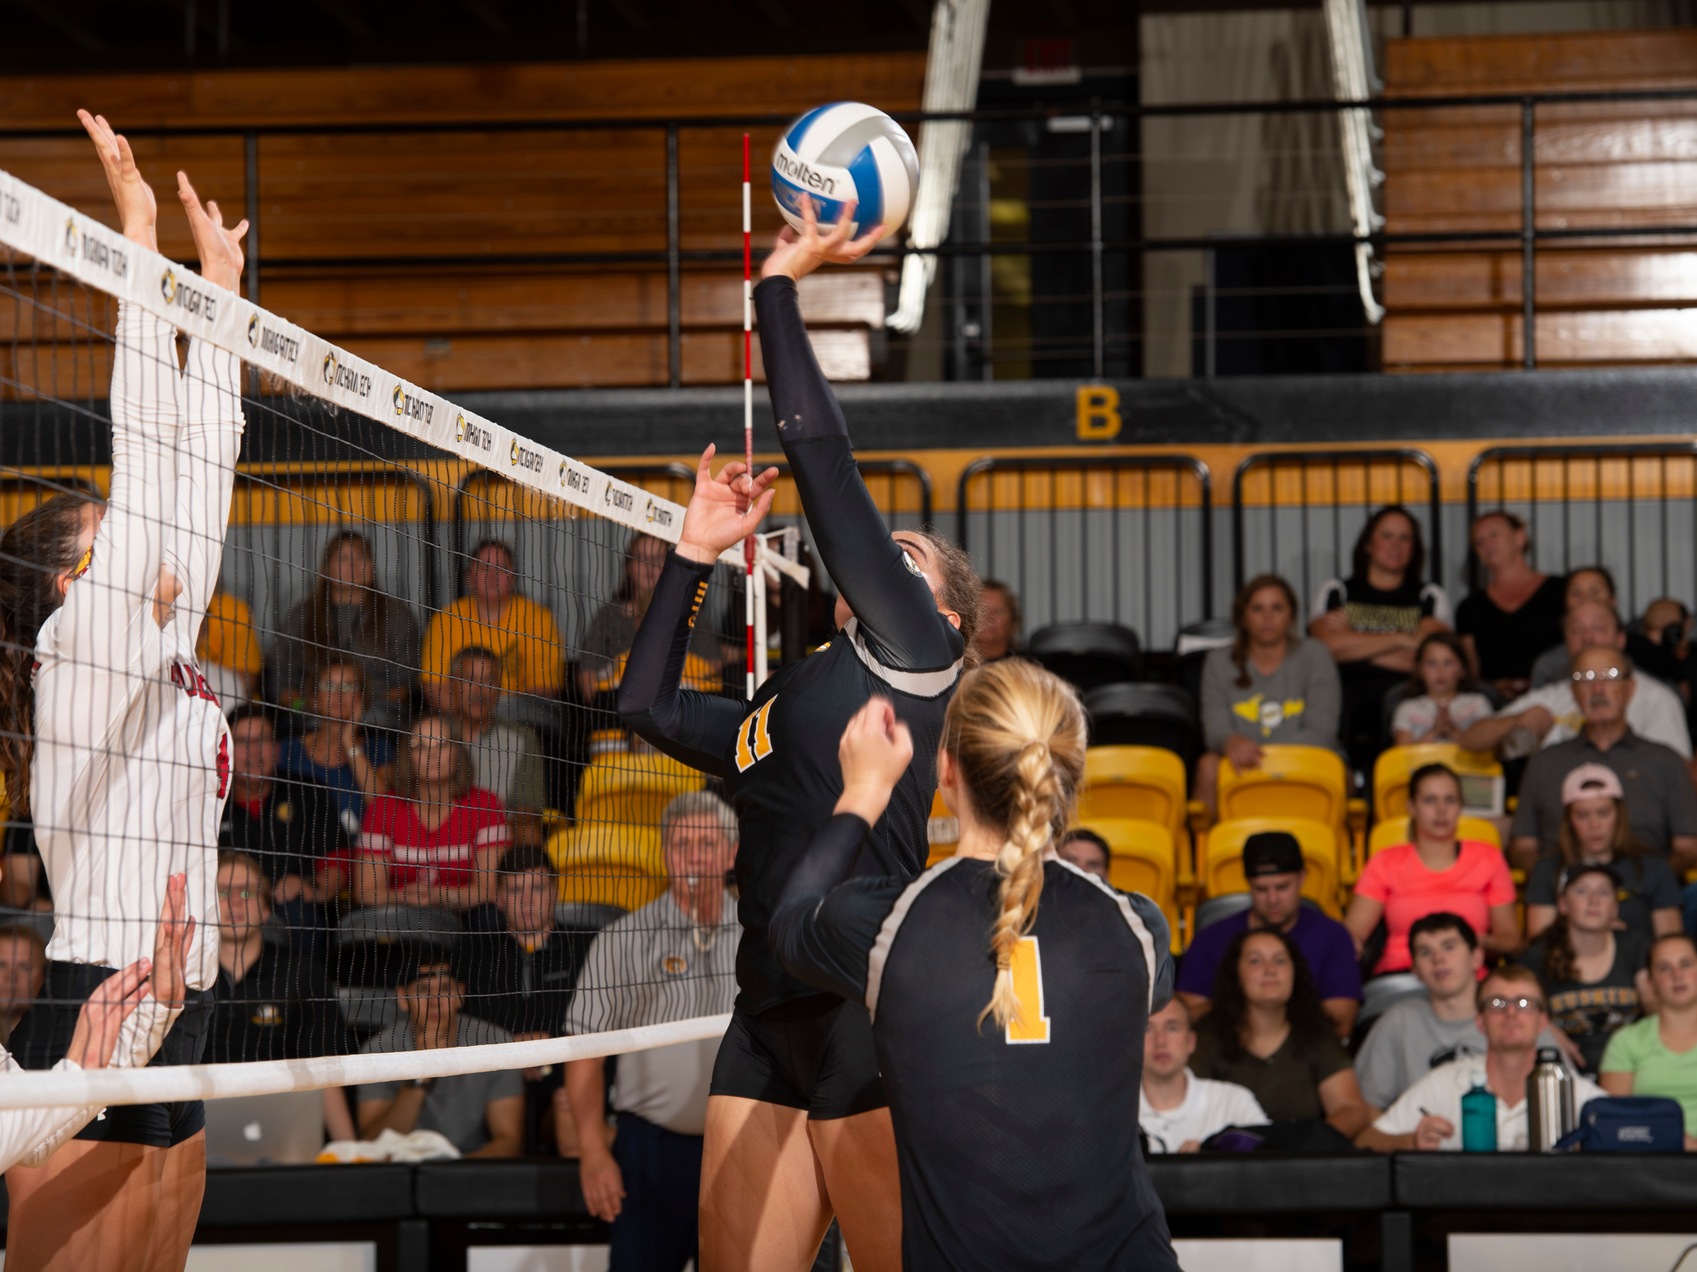 Michigan Tech Faces Lewis in Midwest Regional Tournament Opener